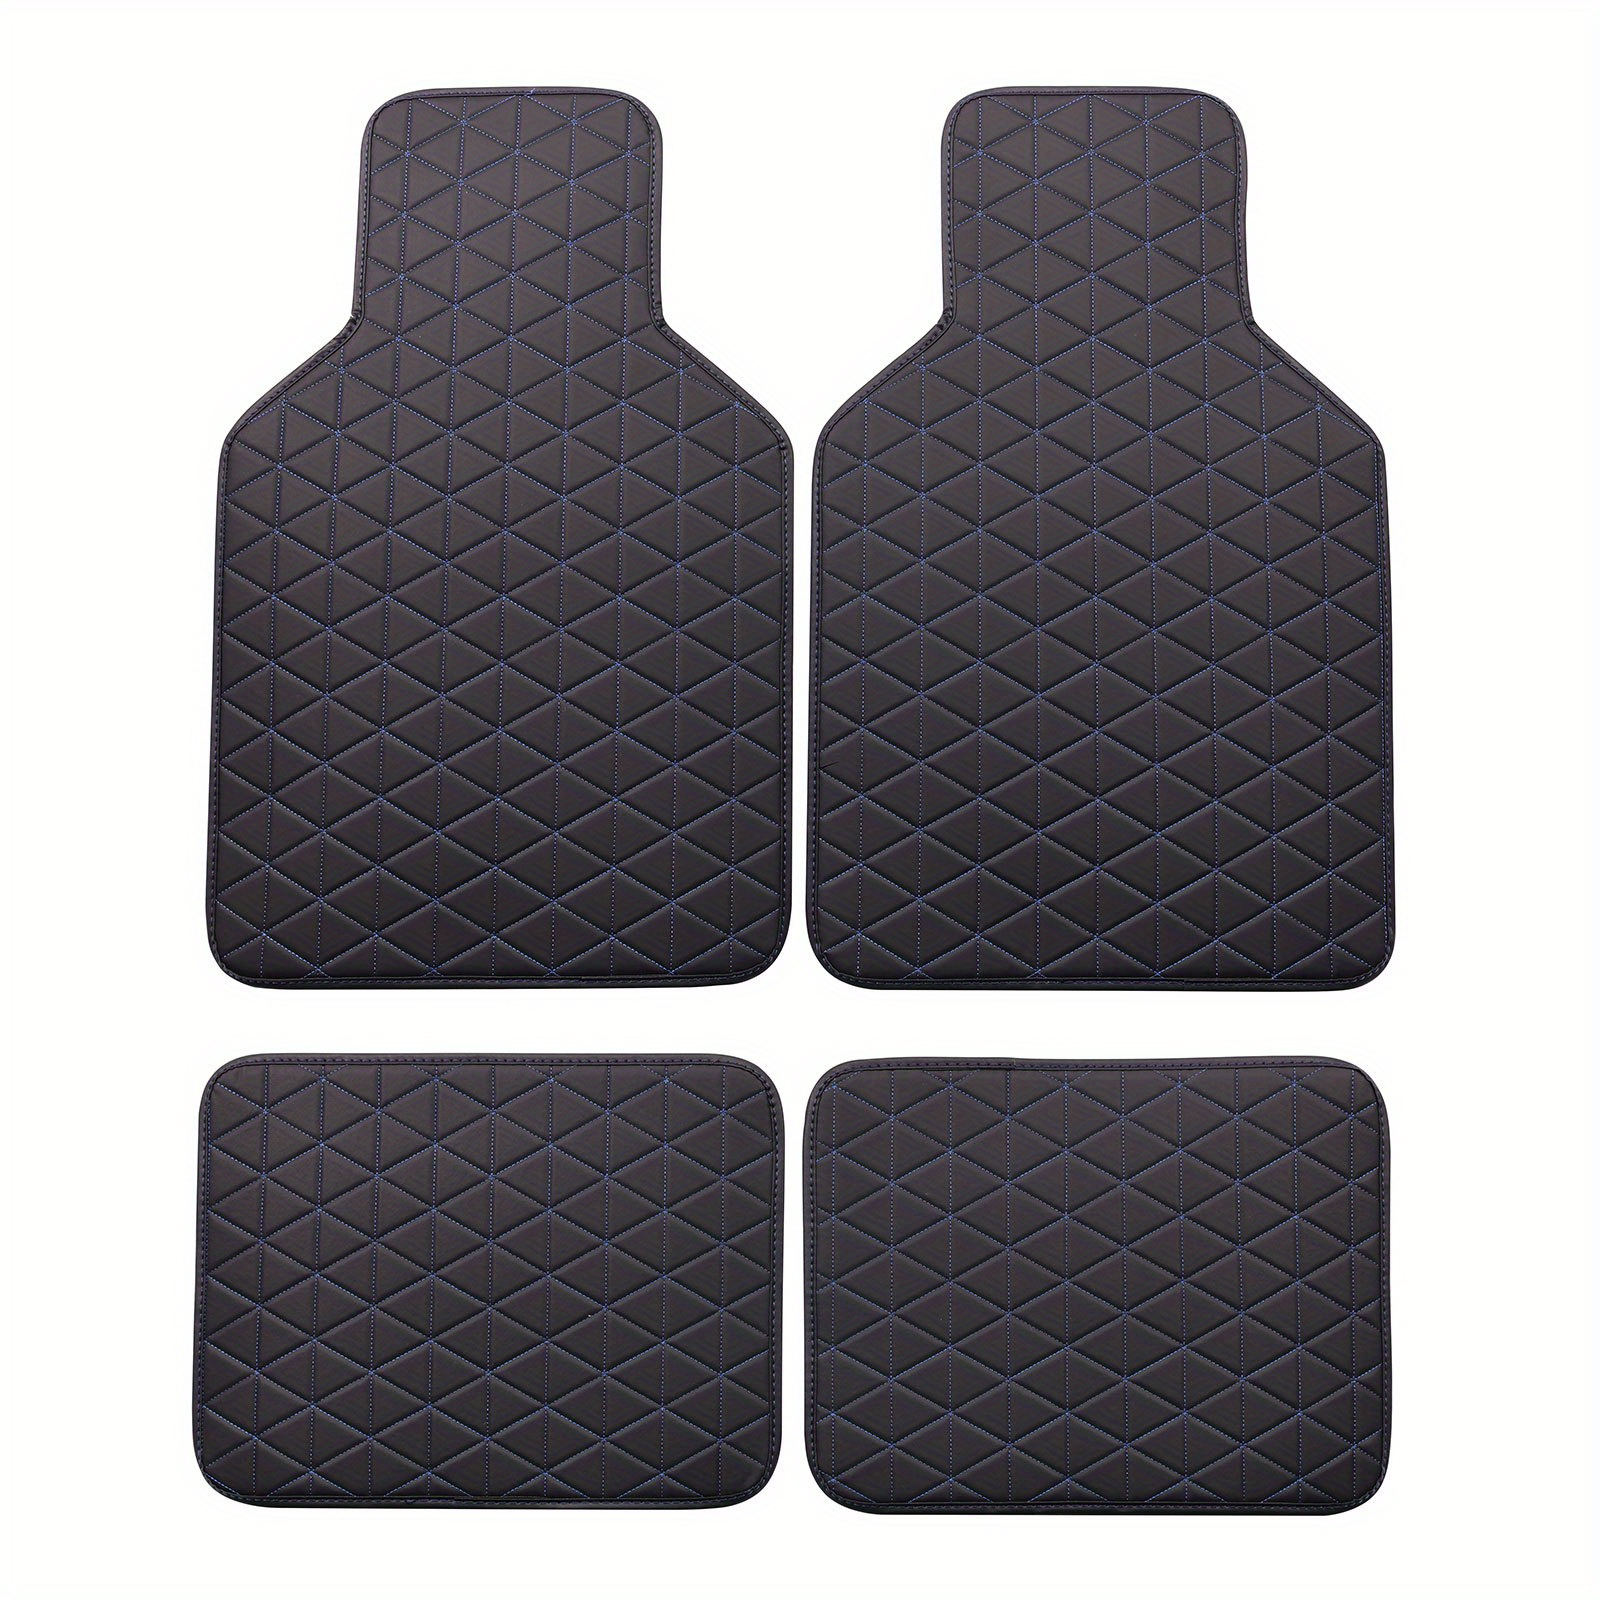 Personalized floor mats with high clear foot size for shoes choosen – Letto  Signs Carpet Co., Ltd